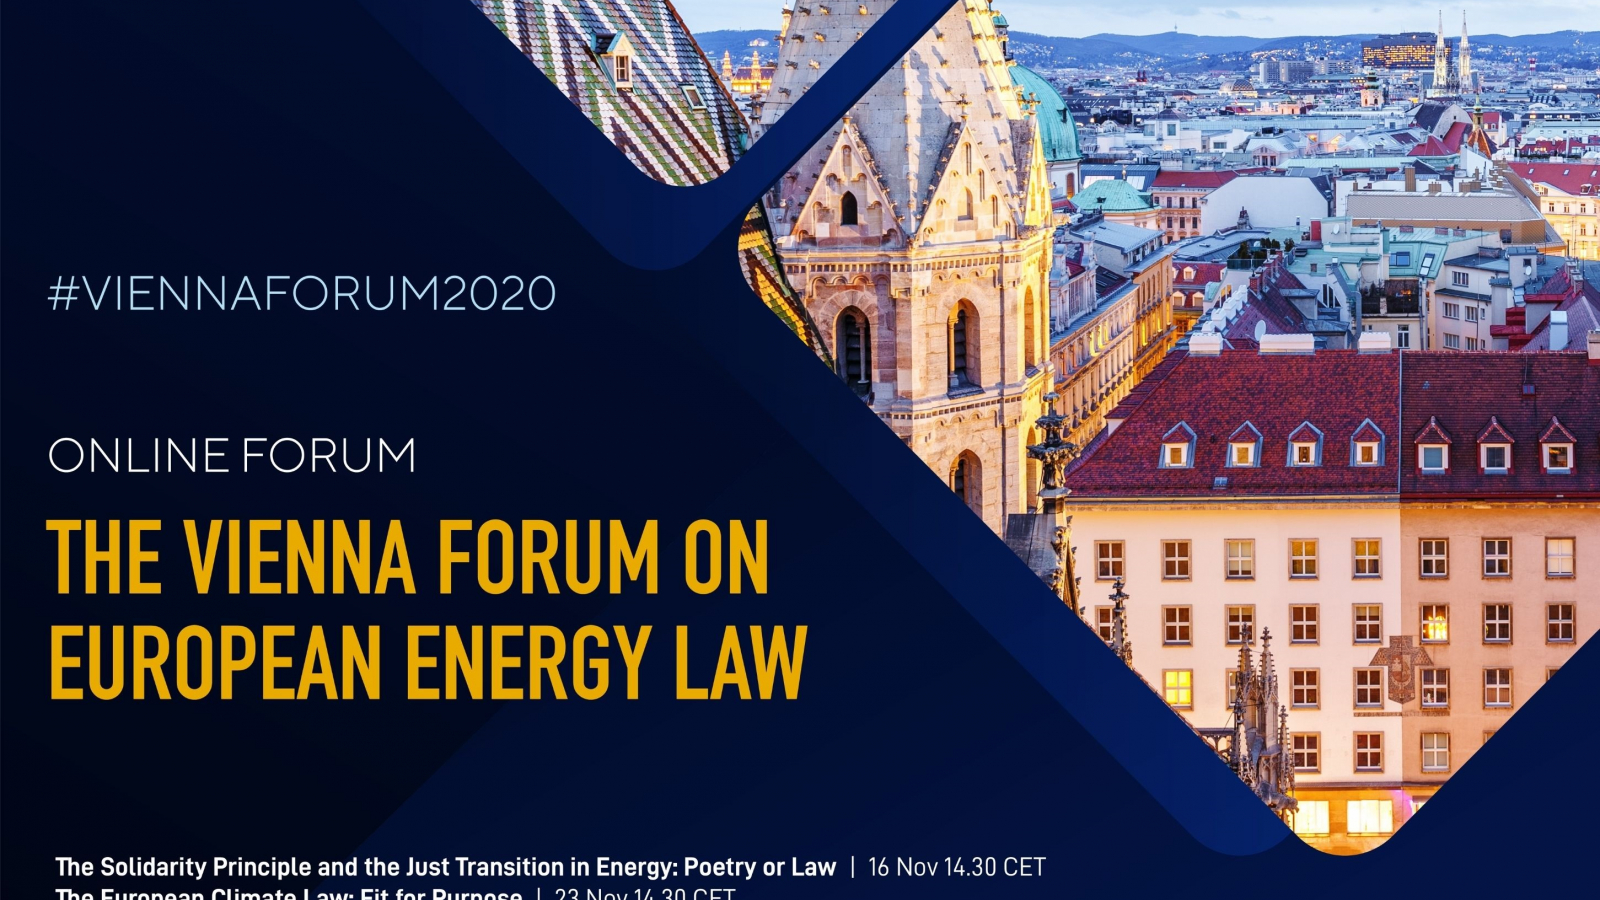 Eighth edition of the Vienna Forum on European Energy Law